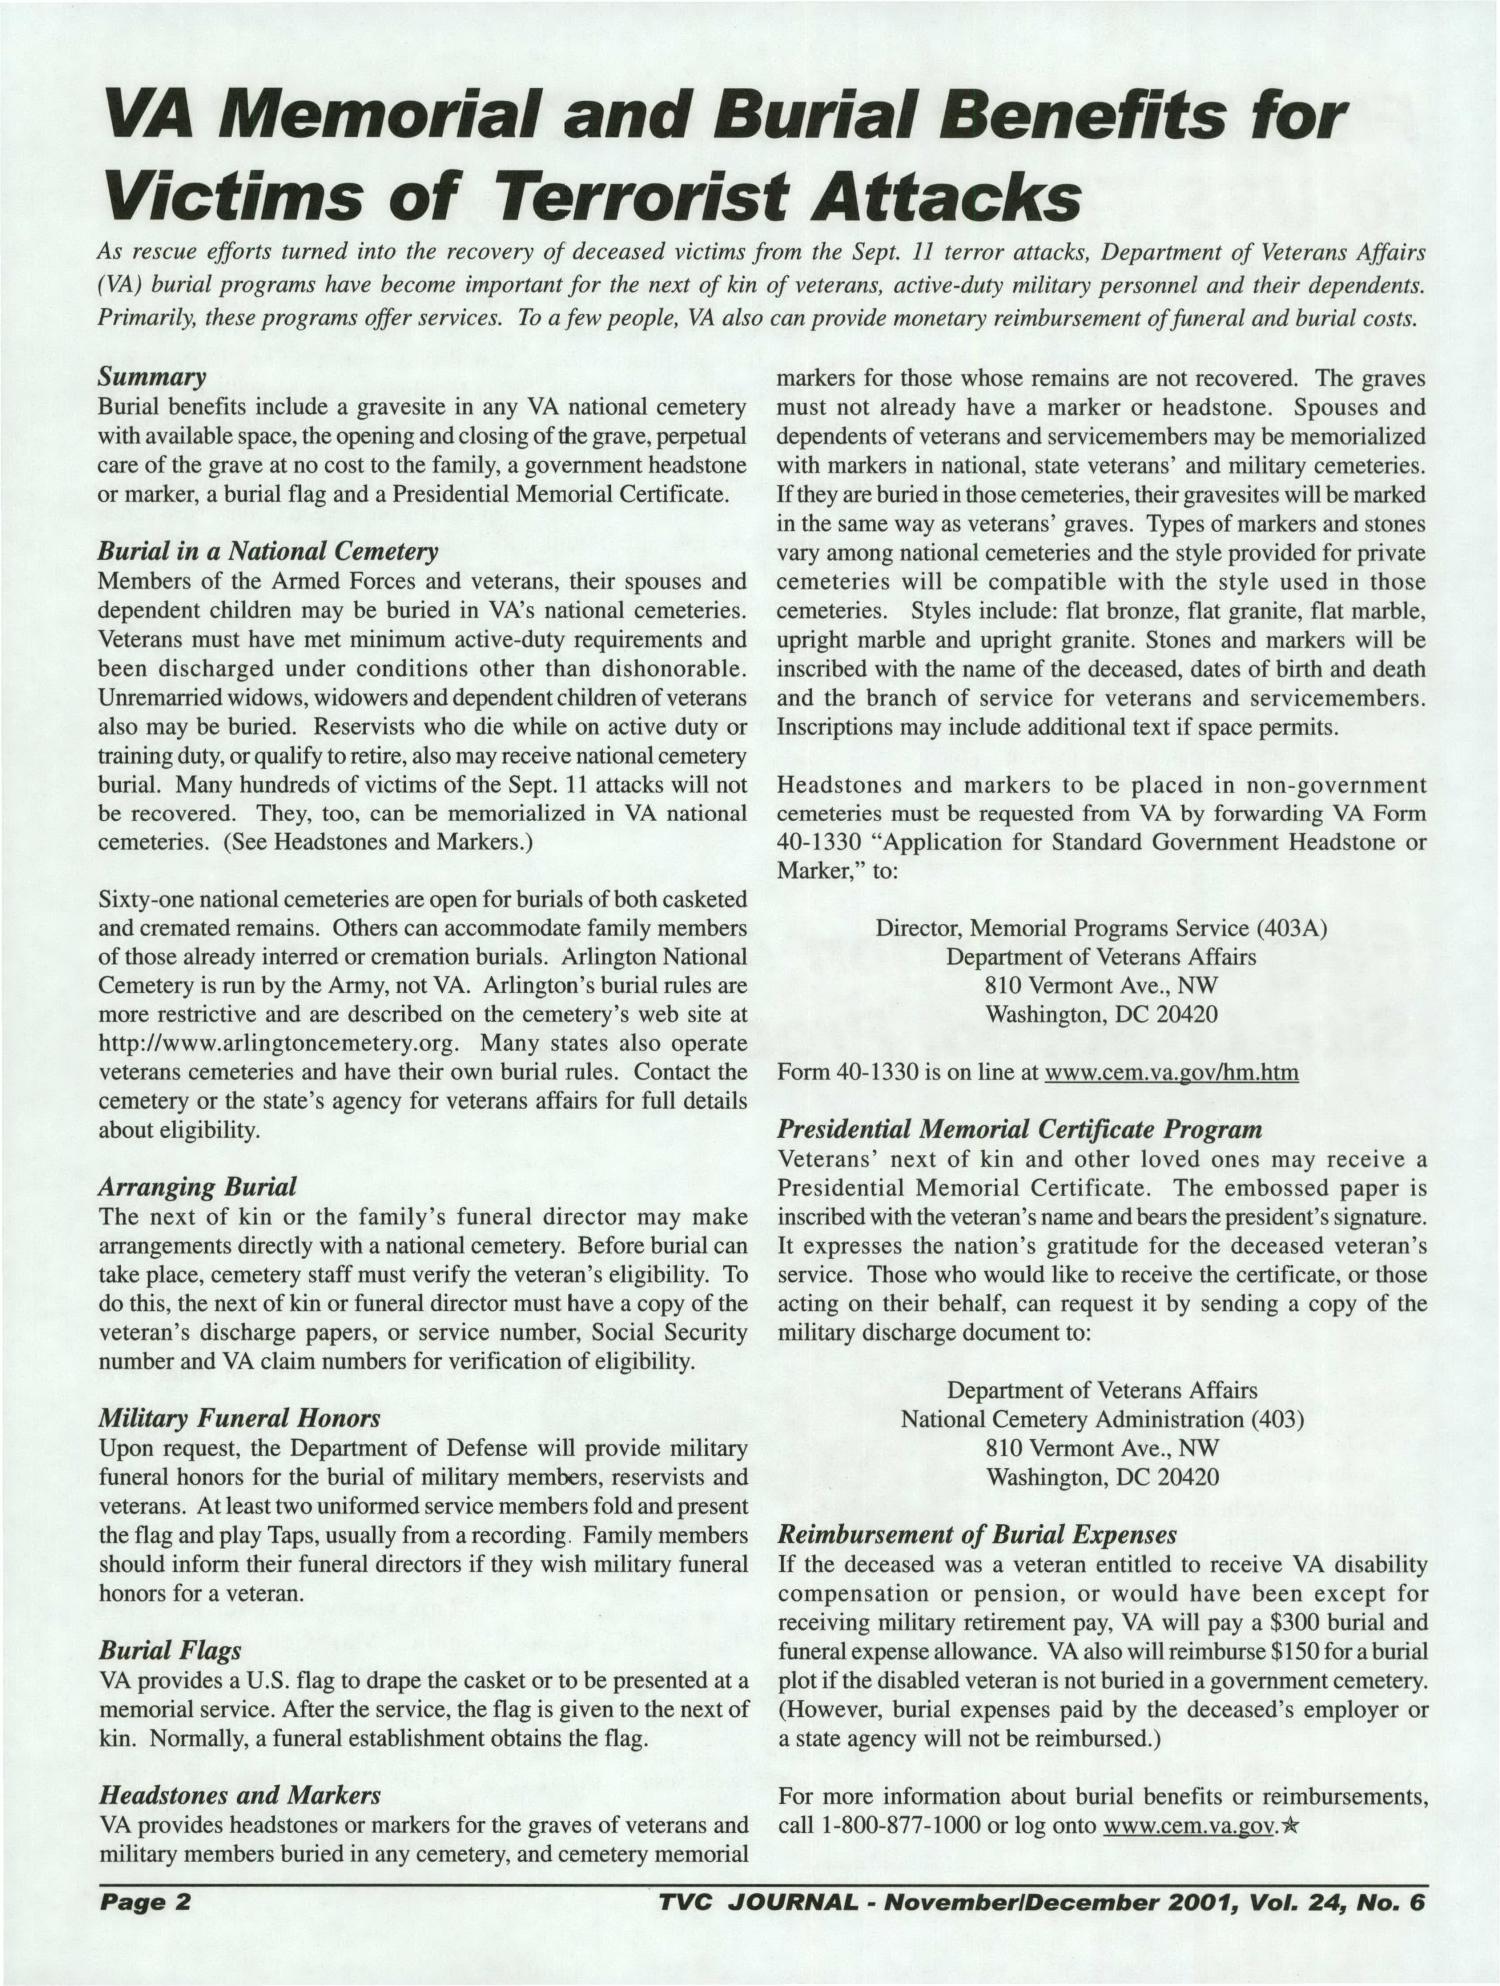 Texas Veterans Commission Journal, Volume 24, Issue 6, November/December 2001
                                                
                                                    Page2
                                                